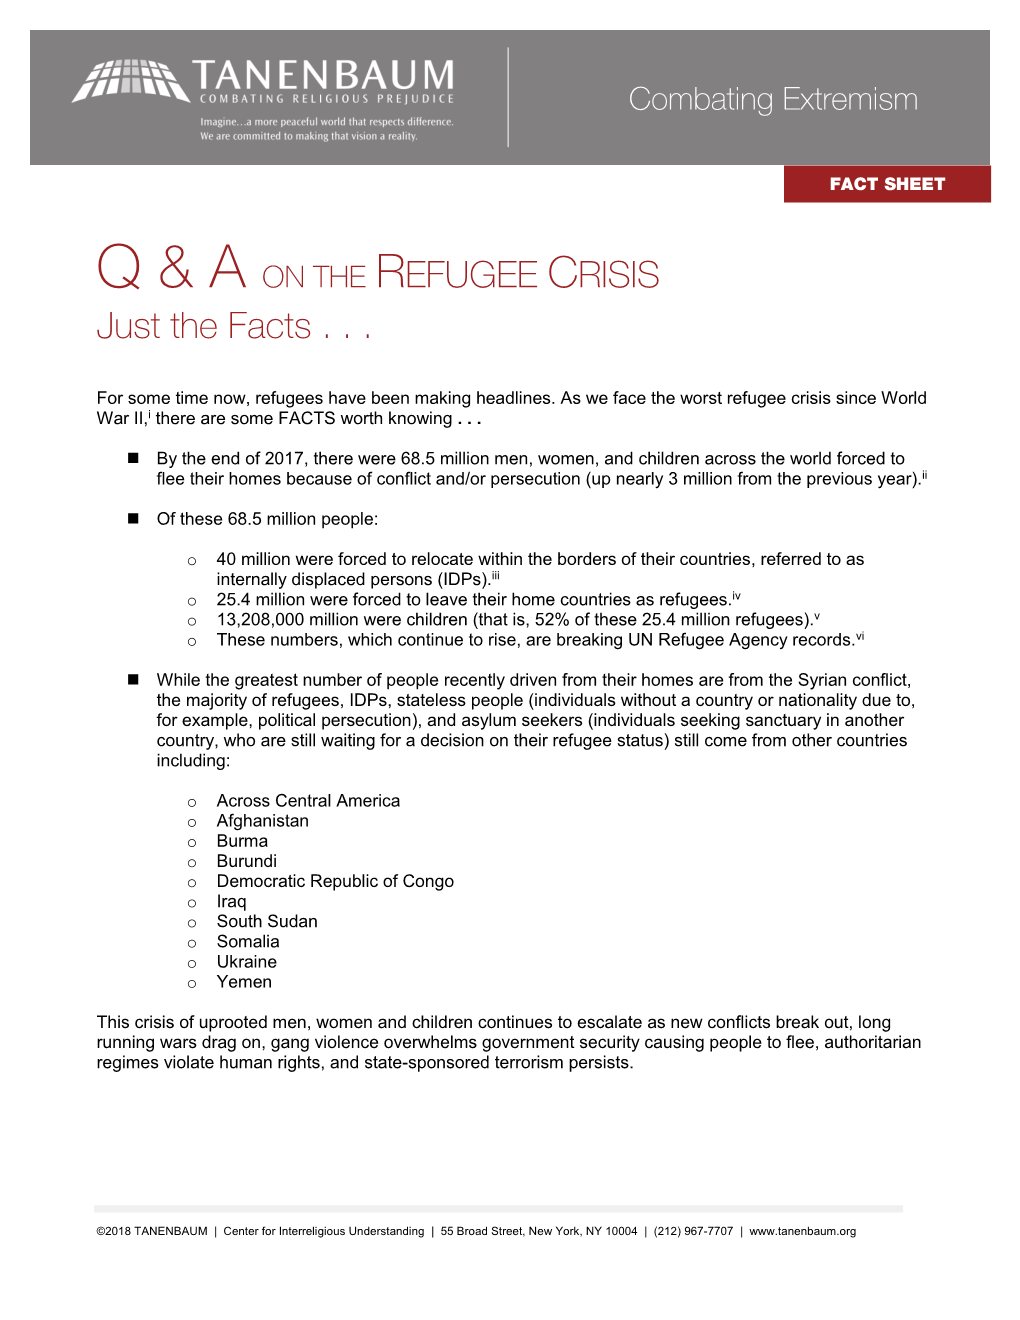 THE REFUGEE CRISIS Just the Facts